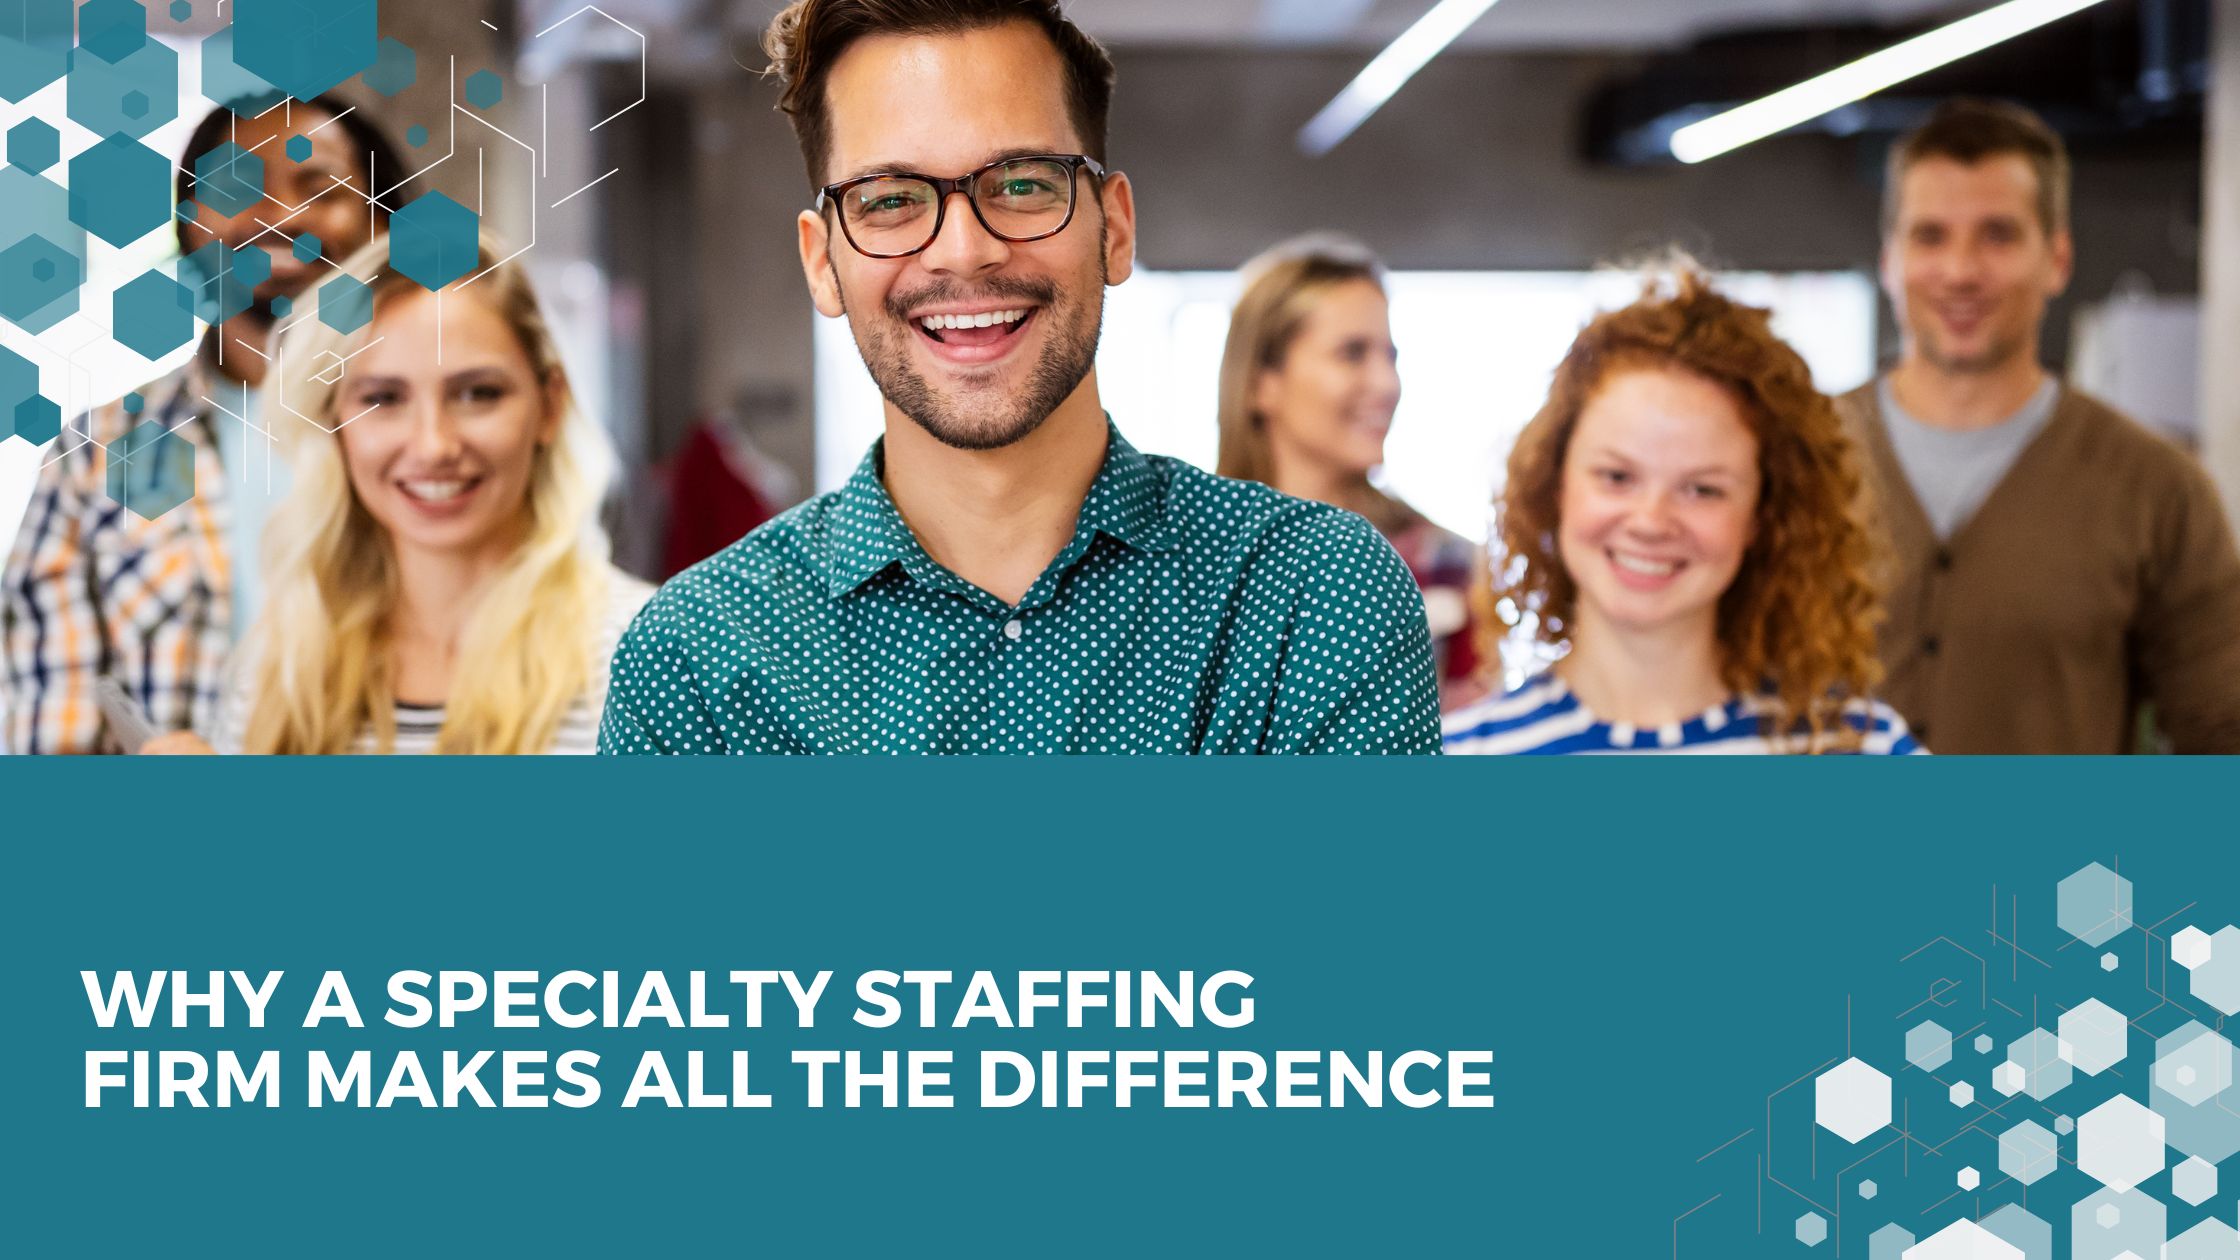 Why a Specialty Staffing Firm Makes All the Difference